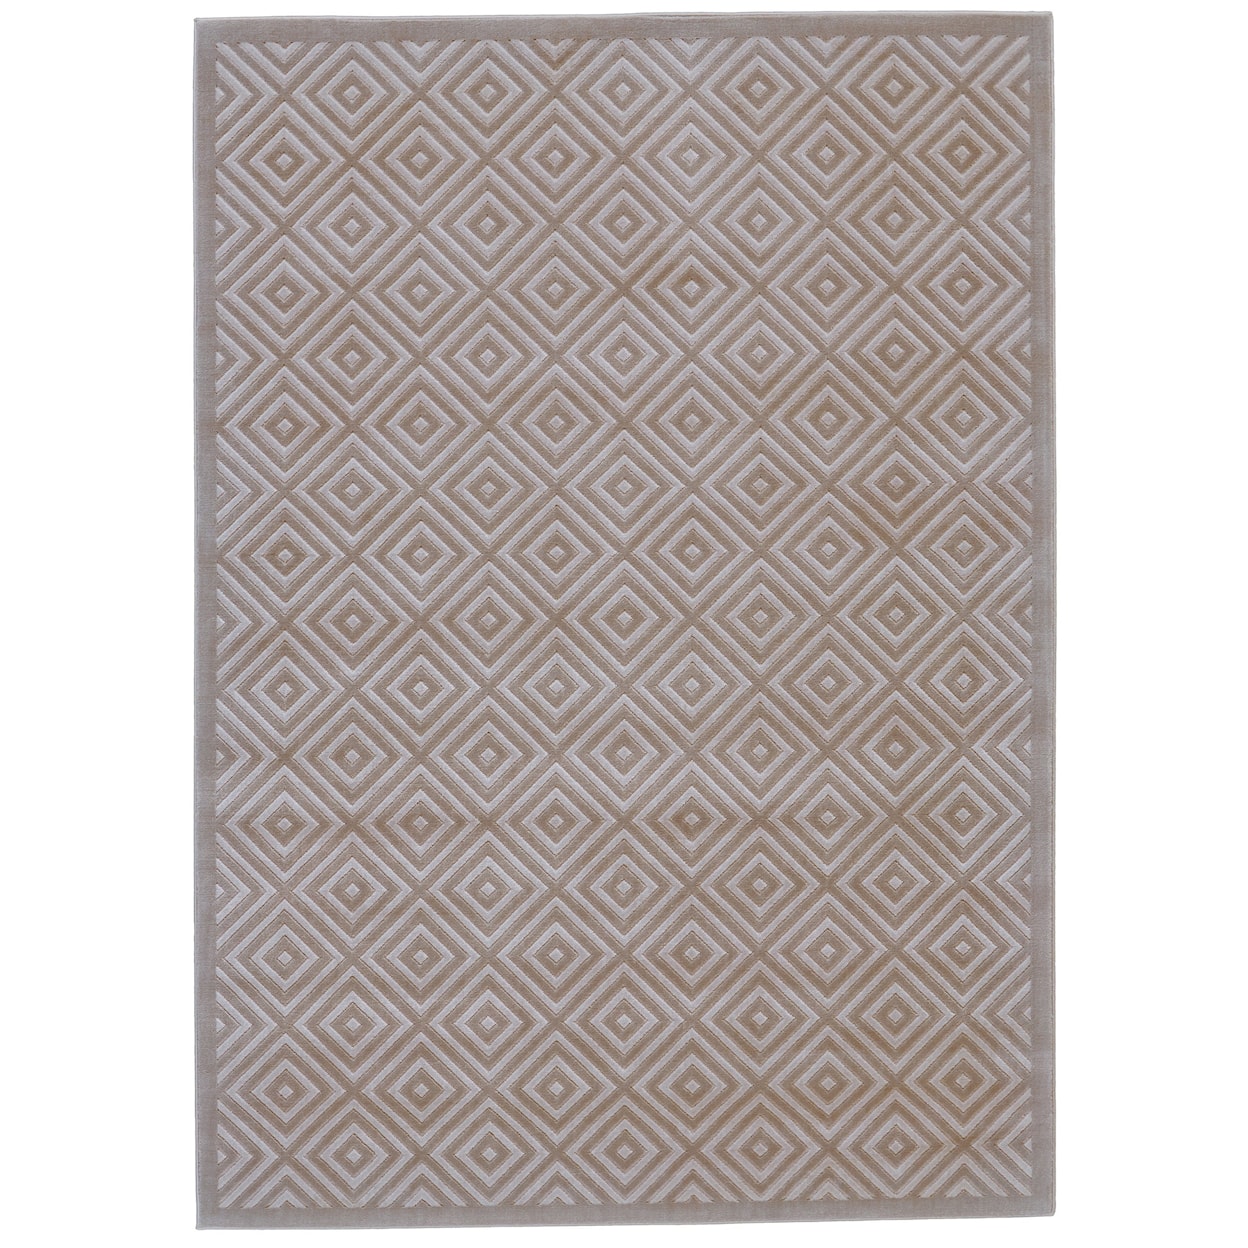 Feizy Rugs Melina Birch/Taupe 2'-2" x 4' Area Rug